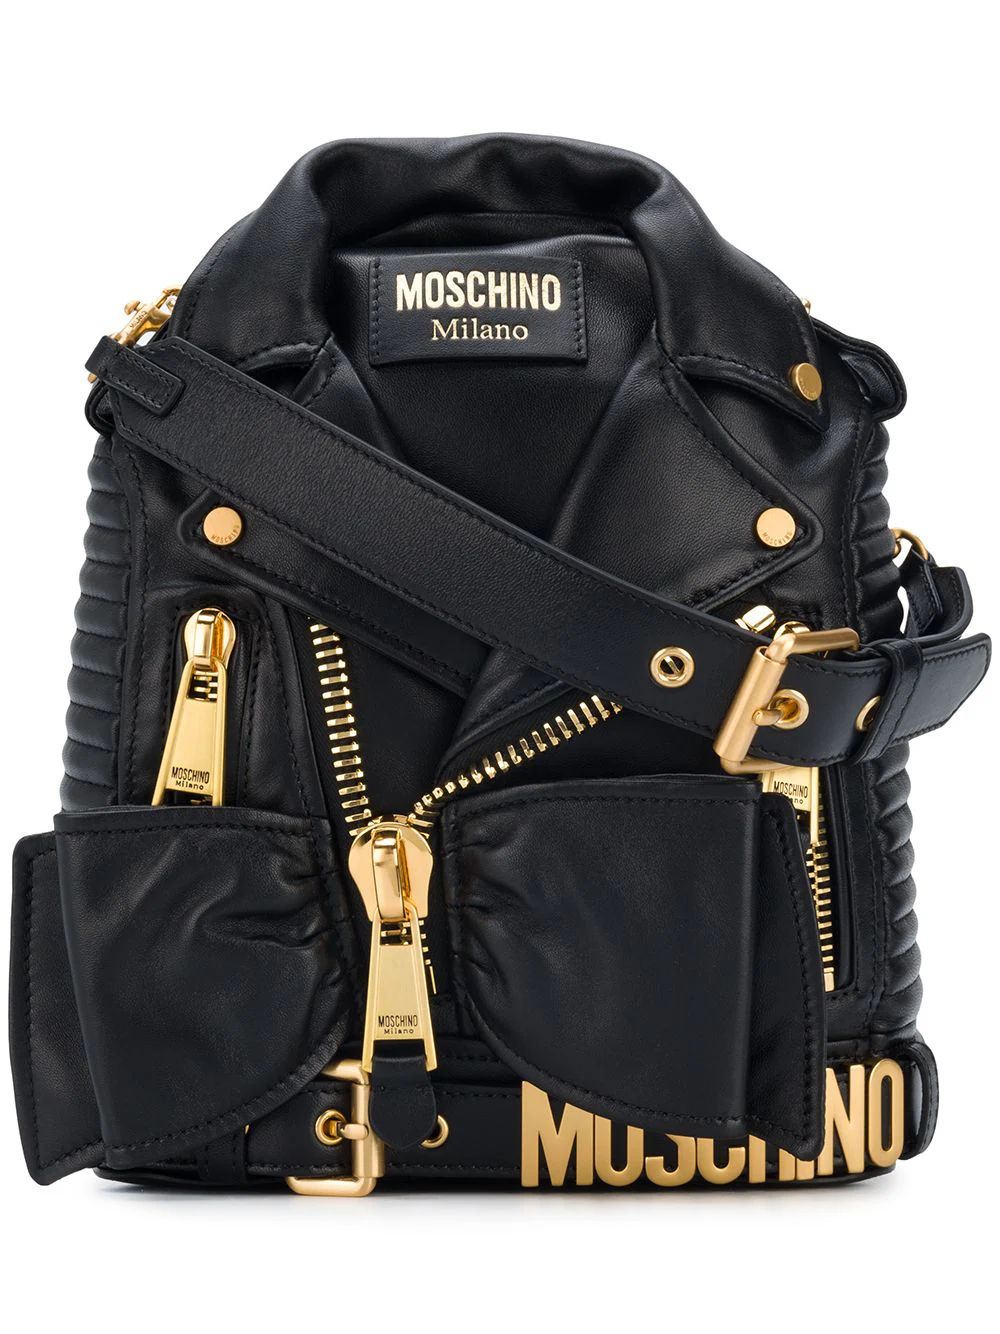 Moschino gold-toned hardware backpack - Black | FarFetch US